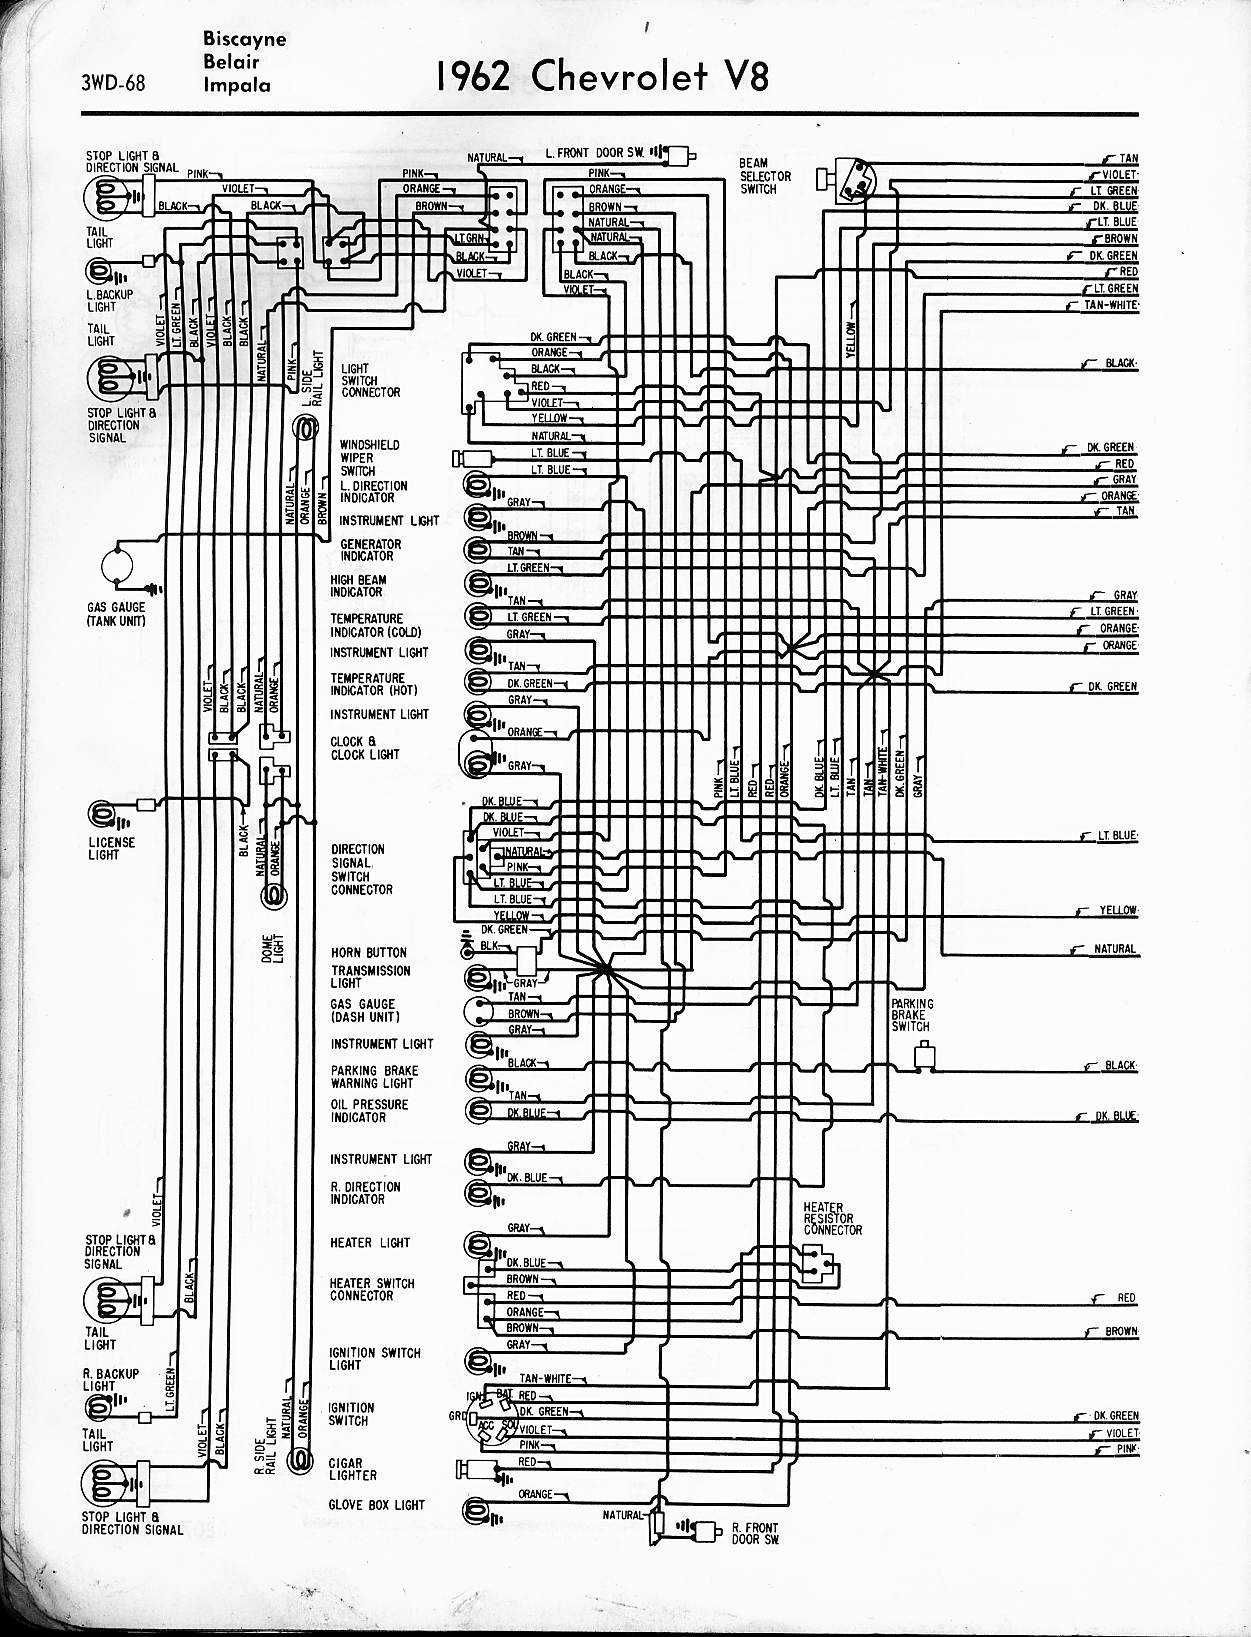 1961 Chevrolet Wiring Diagram from www.oldcarmanualproject.com